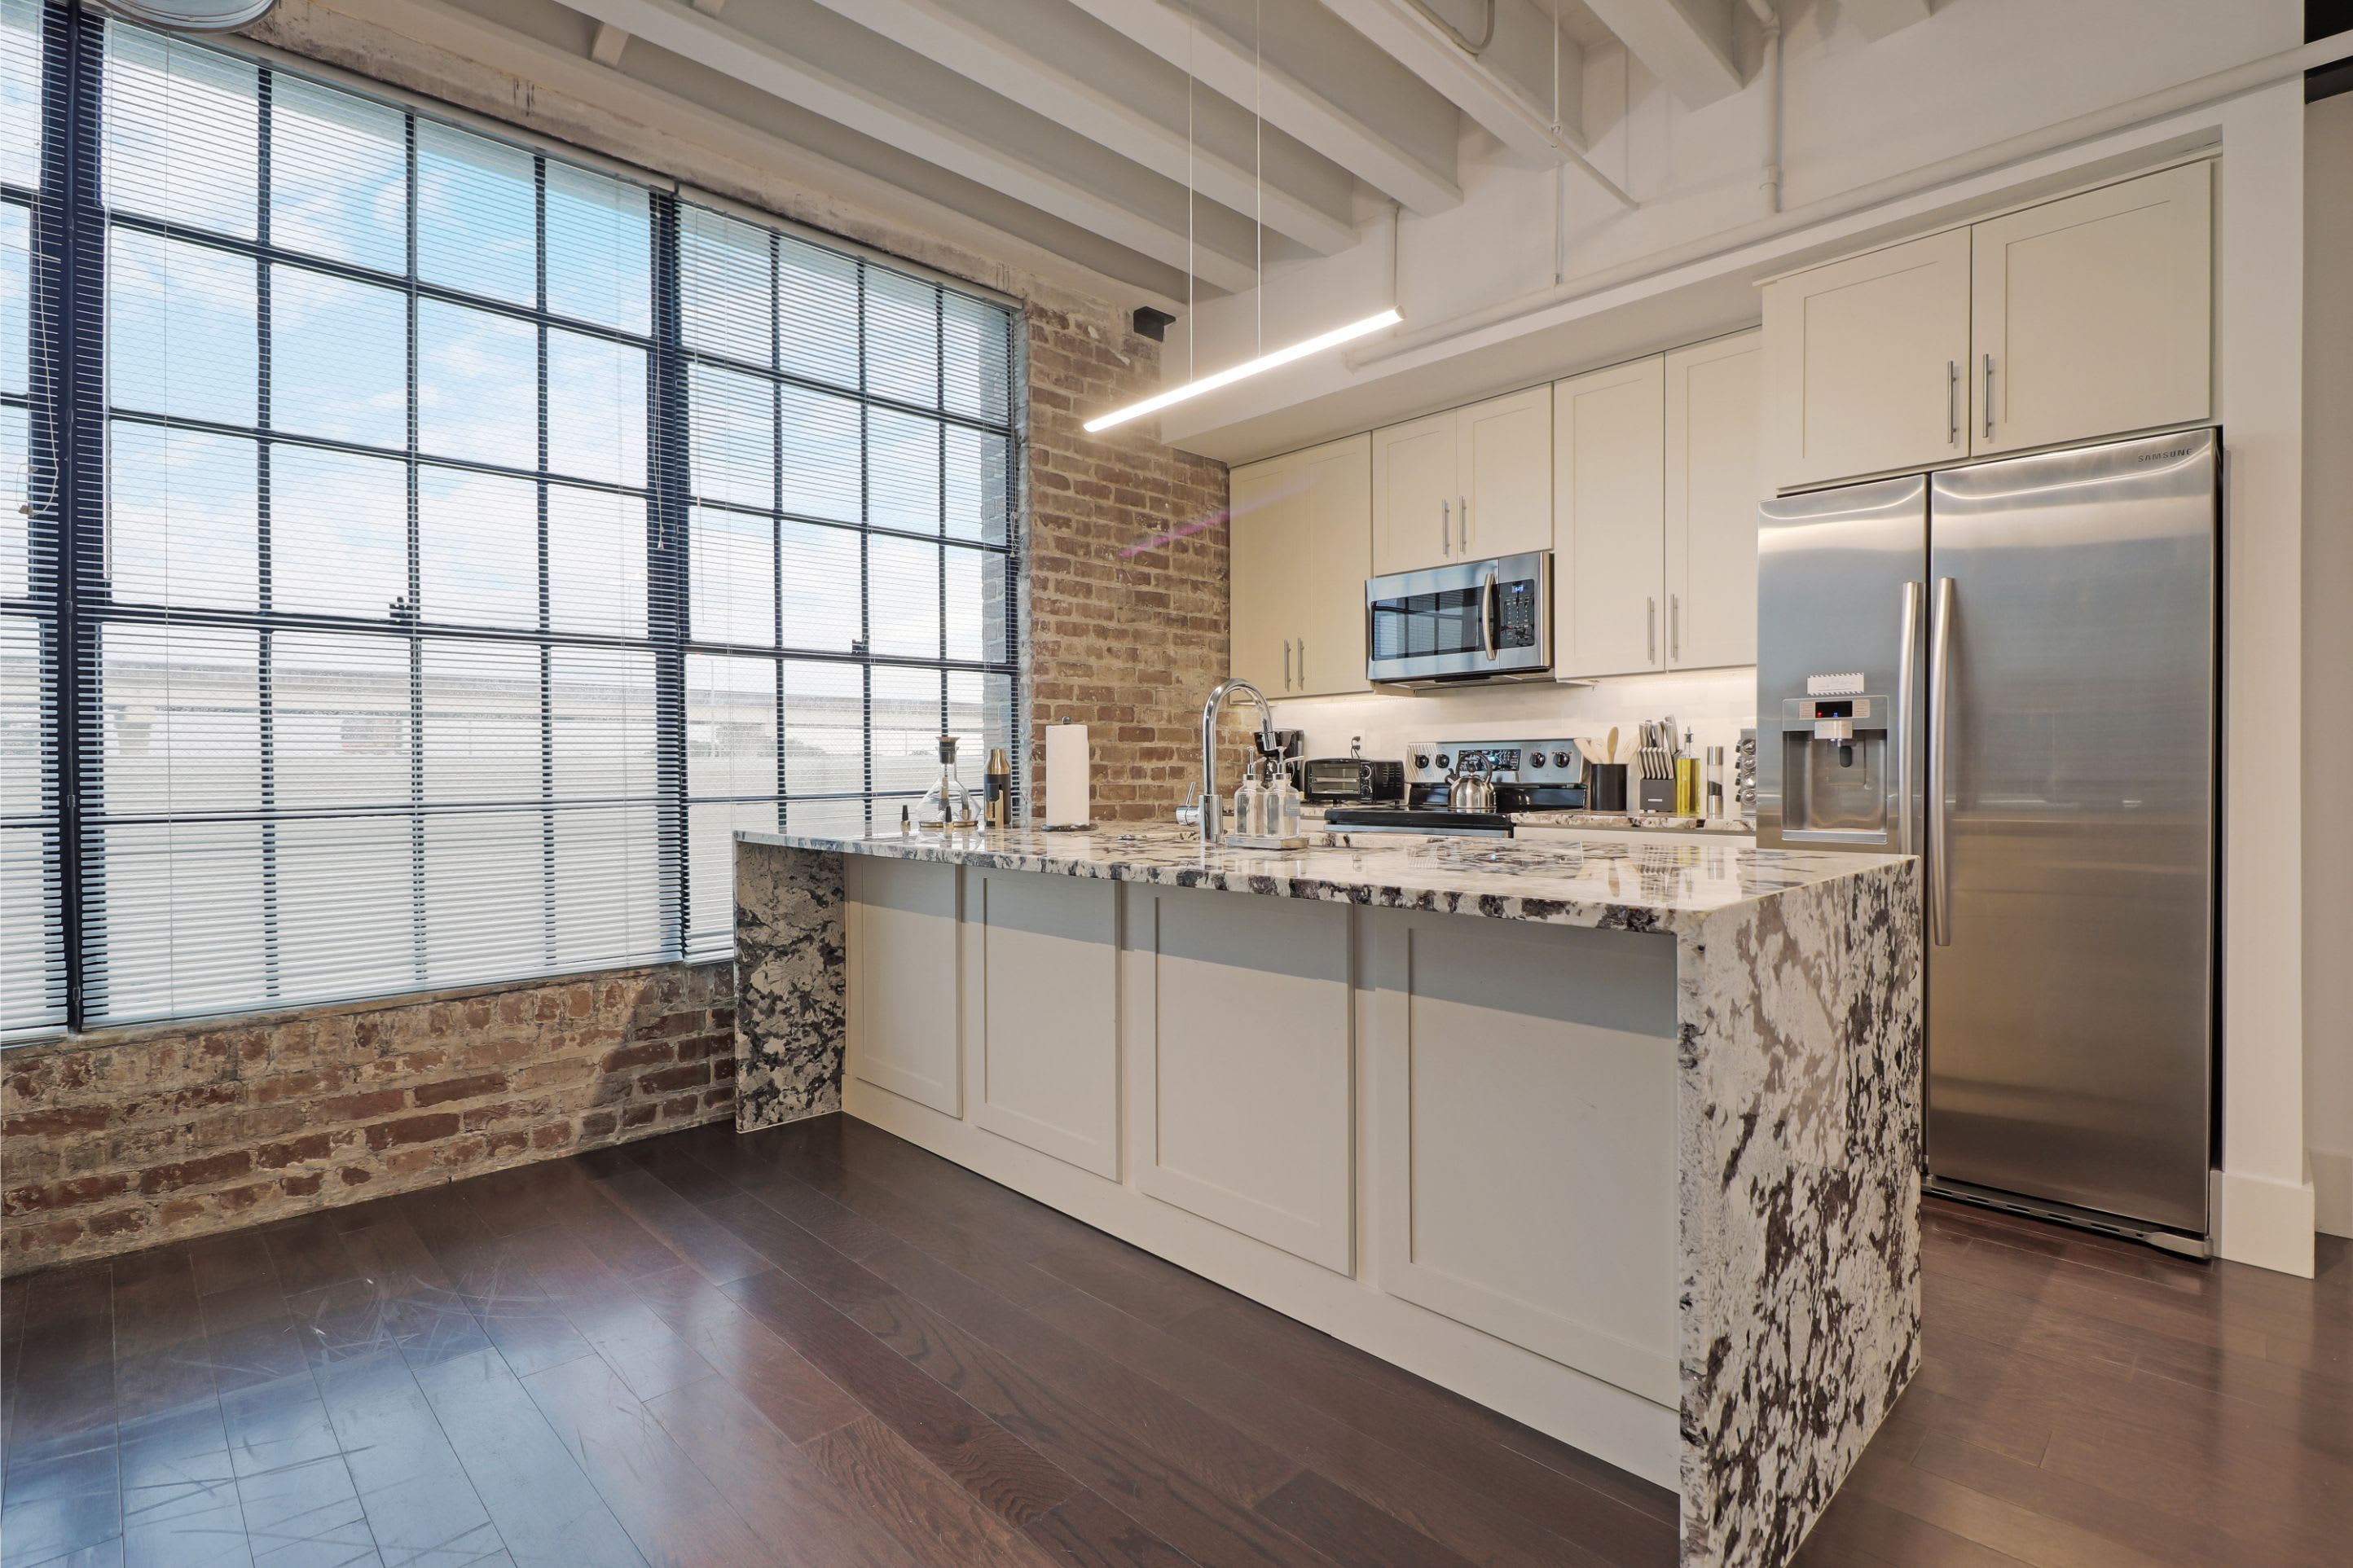 Property Image 2 - Motorworks | 5 minute drive to Bourbon St | Penthouse | Balcony | 2 Bed 2 Bath